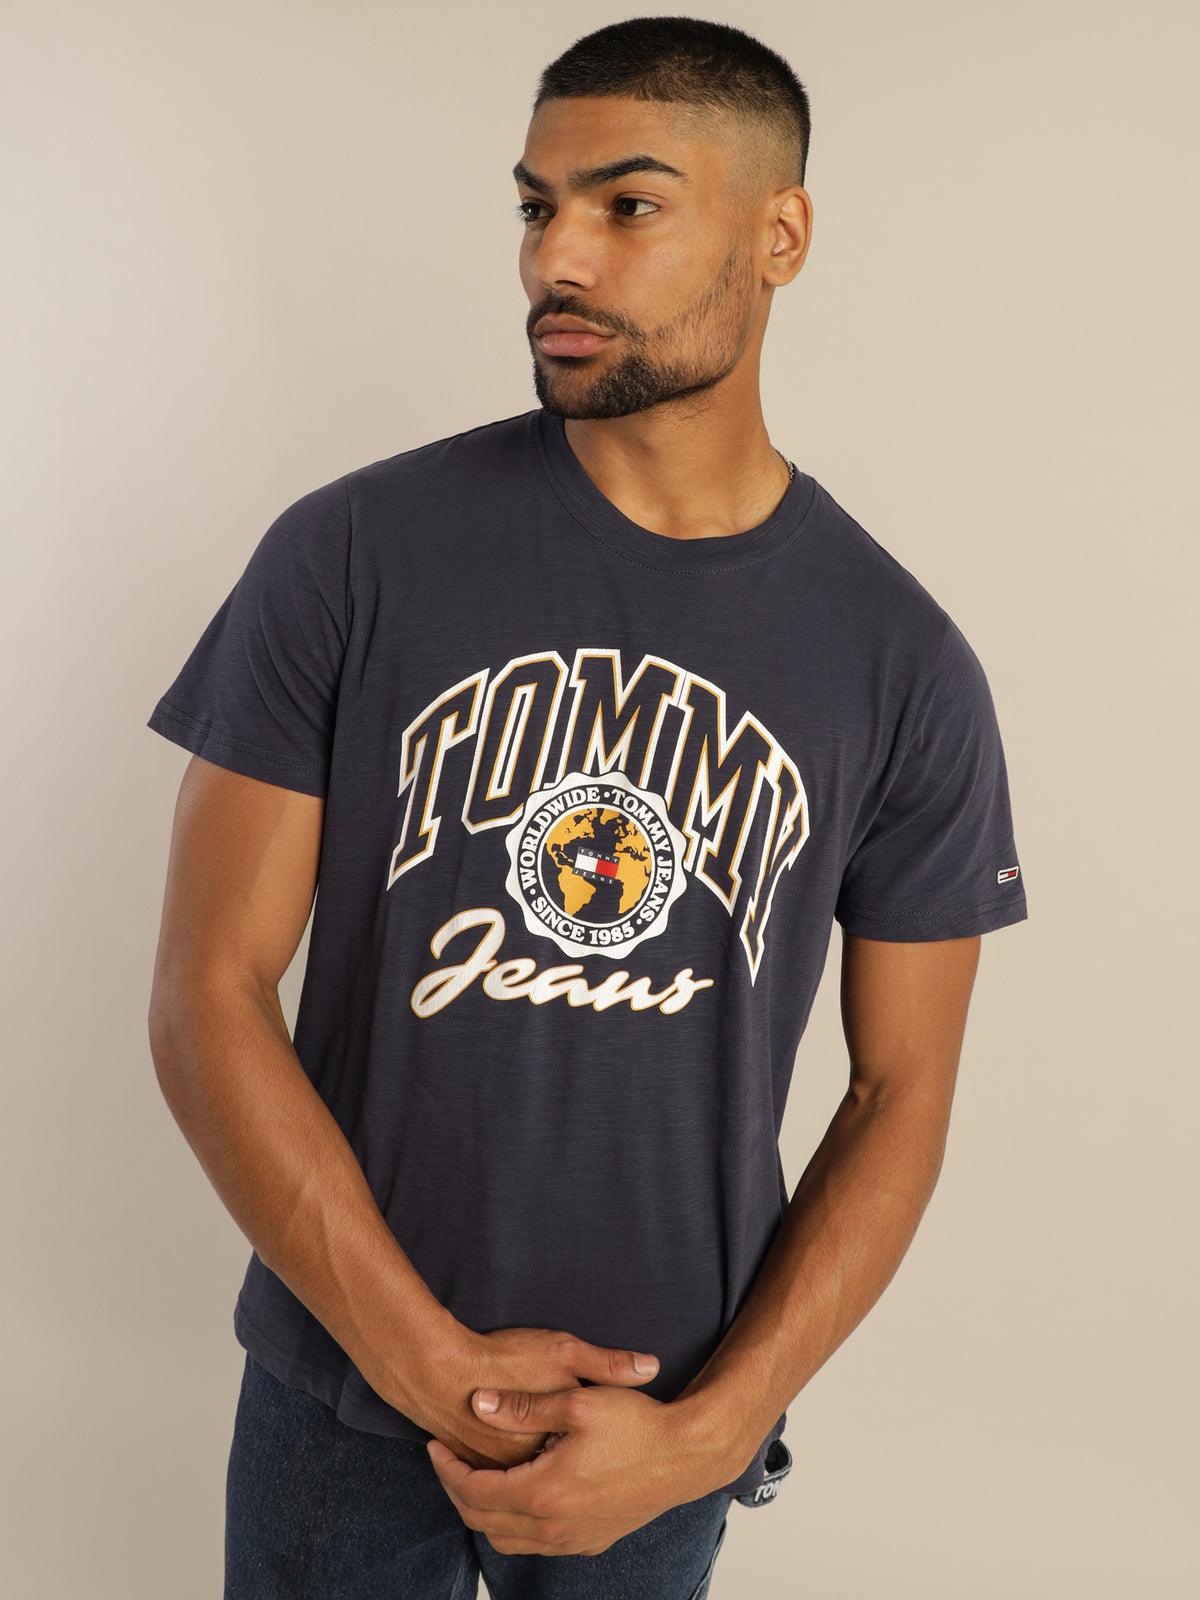 Bold College Graphic T-Shirt in Twilight Navy